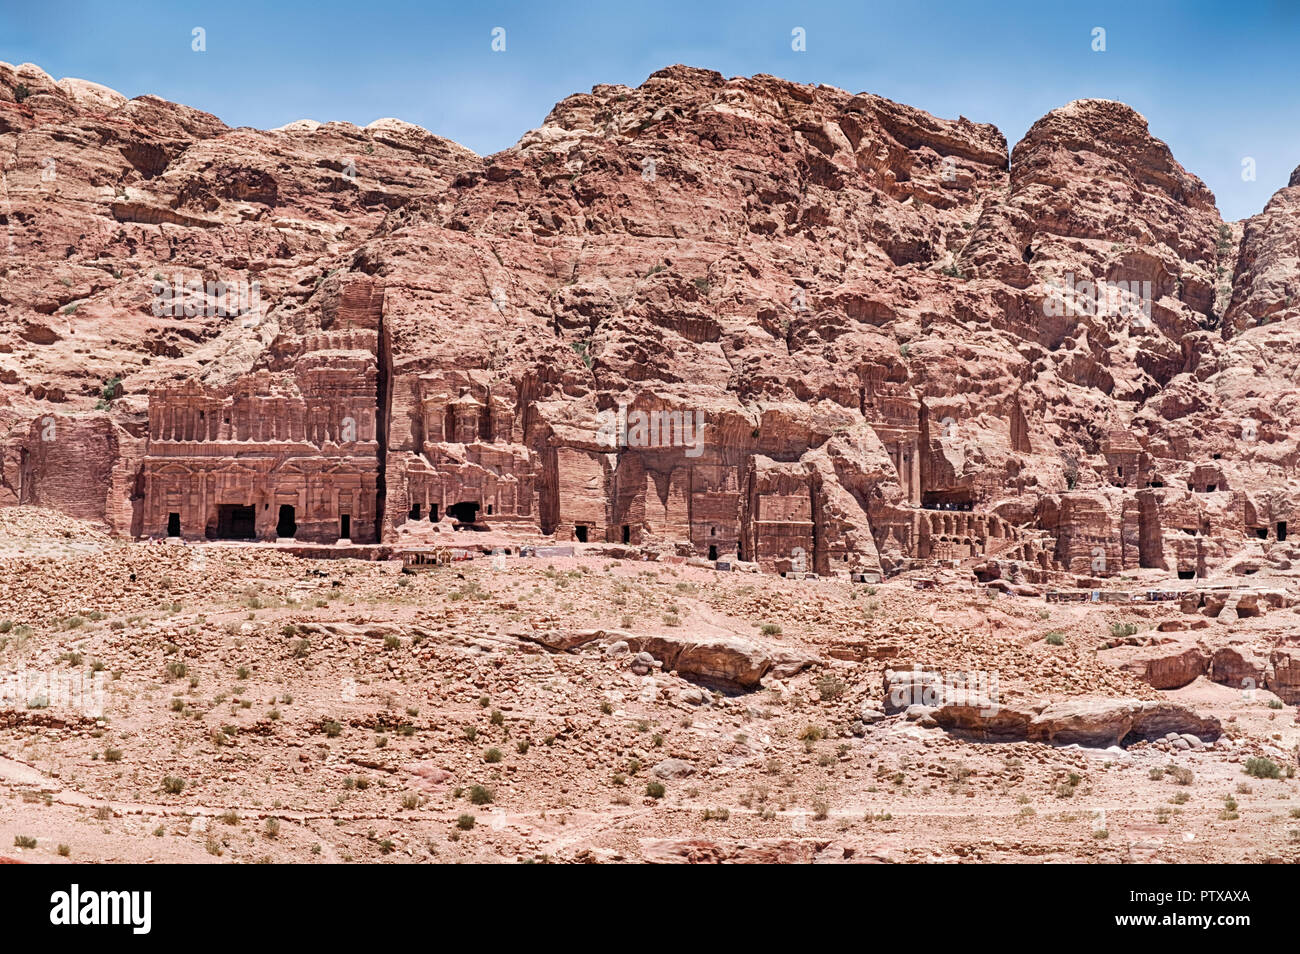 In this section of Petra, the Royal Tombs are a string of ornate burial chambers carved into the rocky cliffs. Stock Photo